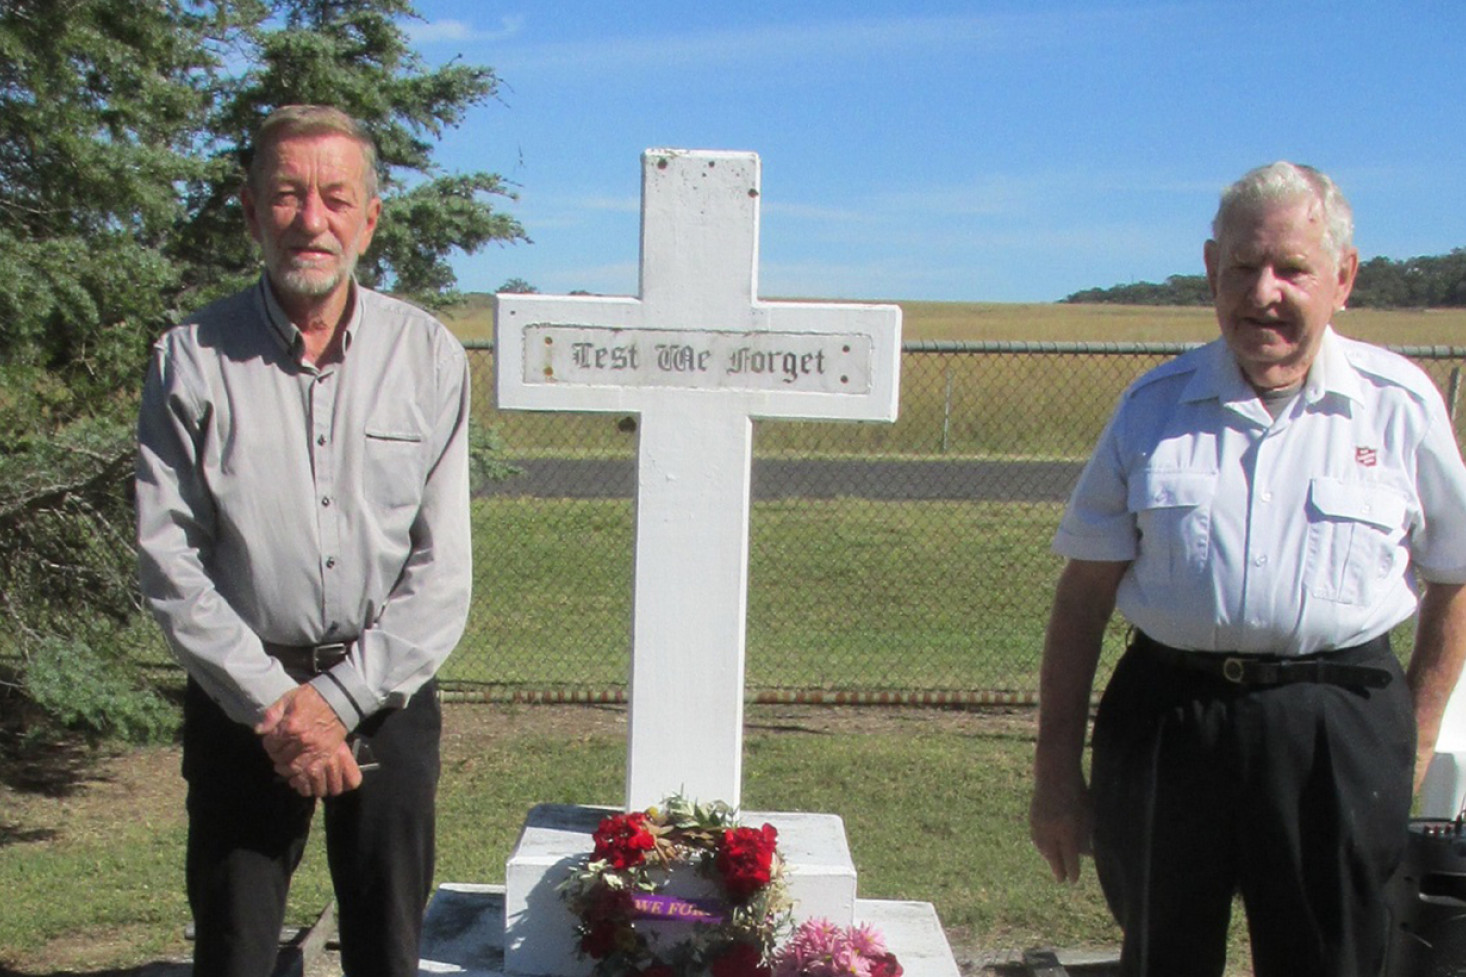 Salvation Army representative Robert Marshall (right) conducted the service, and his audio assistant Trevor Neale laid a wreath in memory of the fallen.